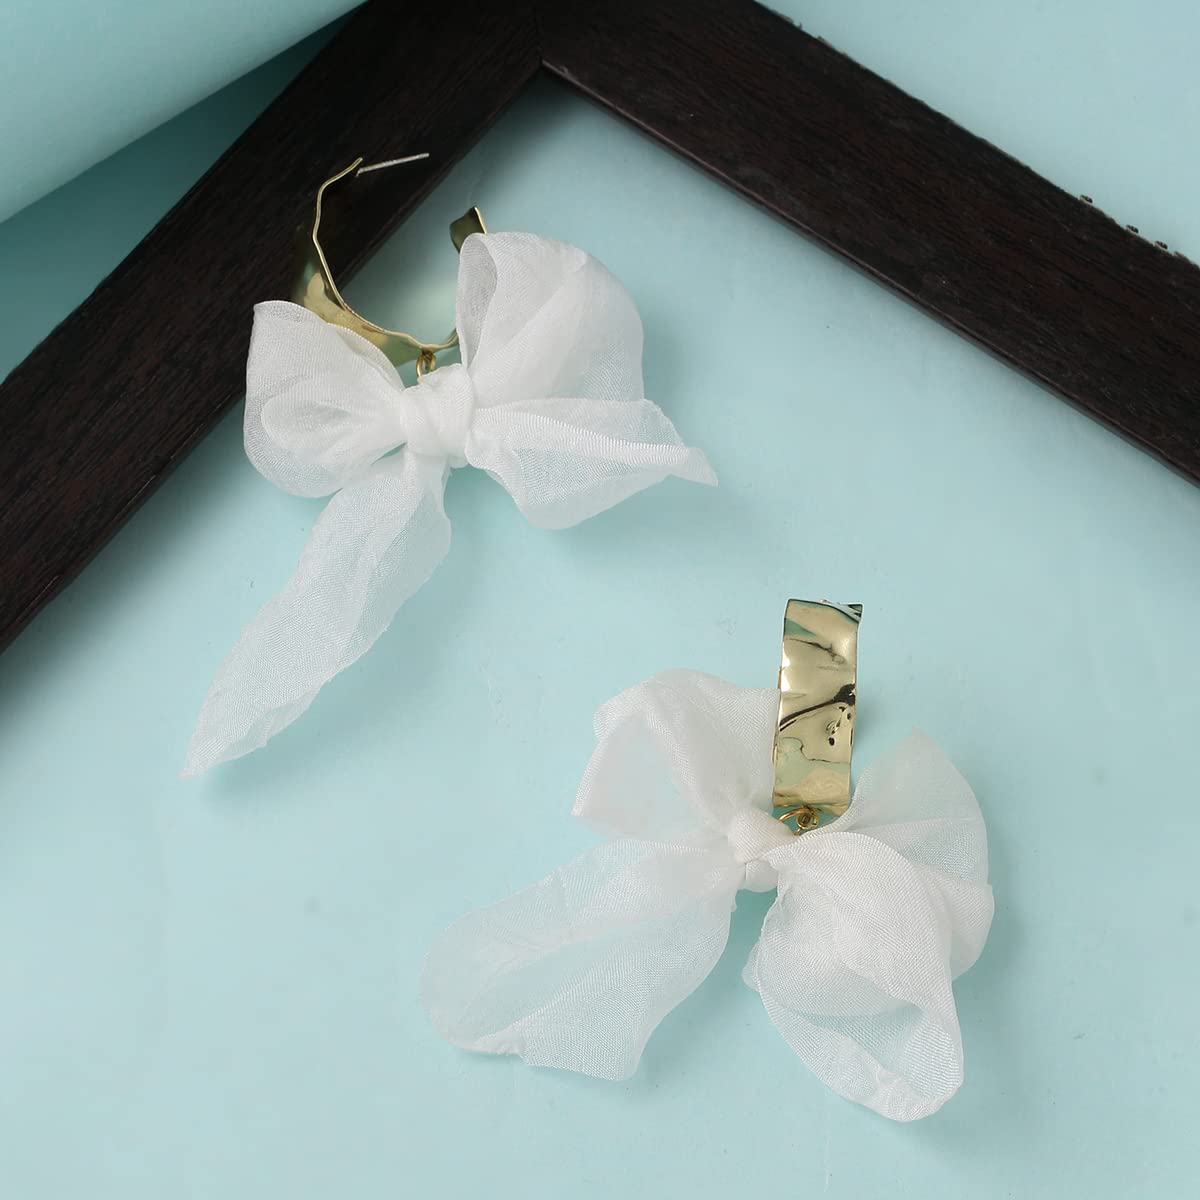 Yellow Chimes Earrings For Women White Colored Cloth Woven Bow Shaped Drop Earrings For Women and Girls